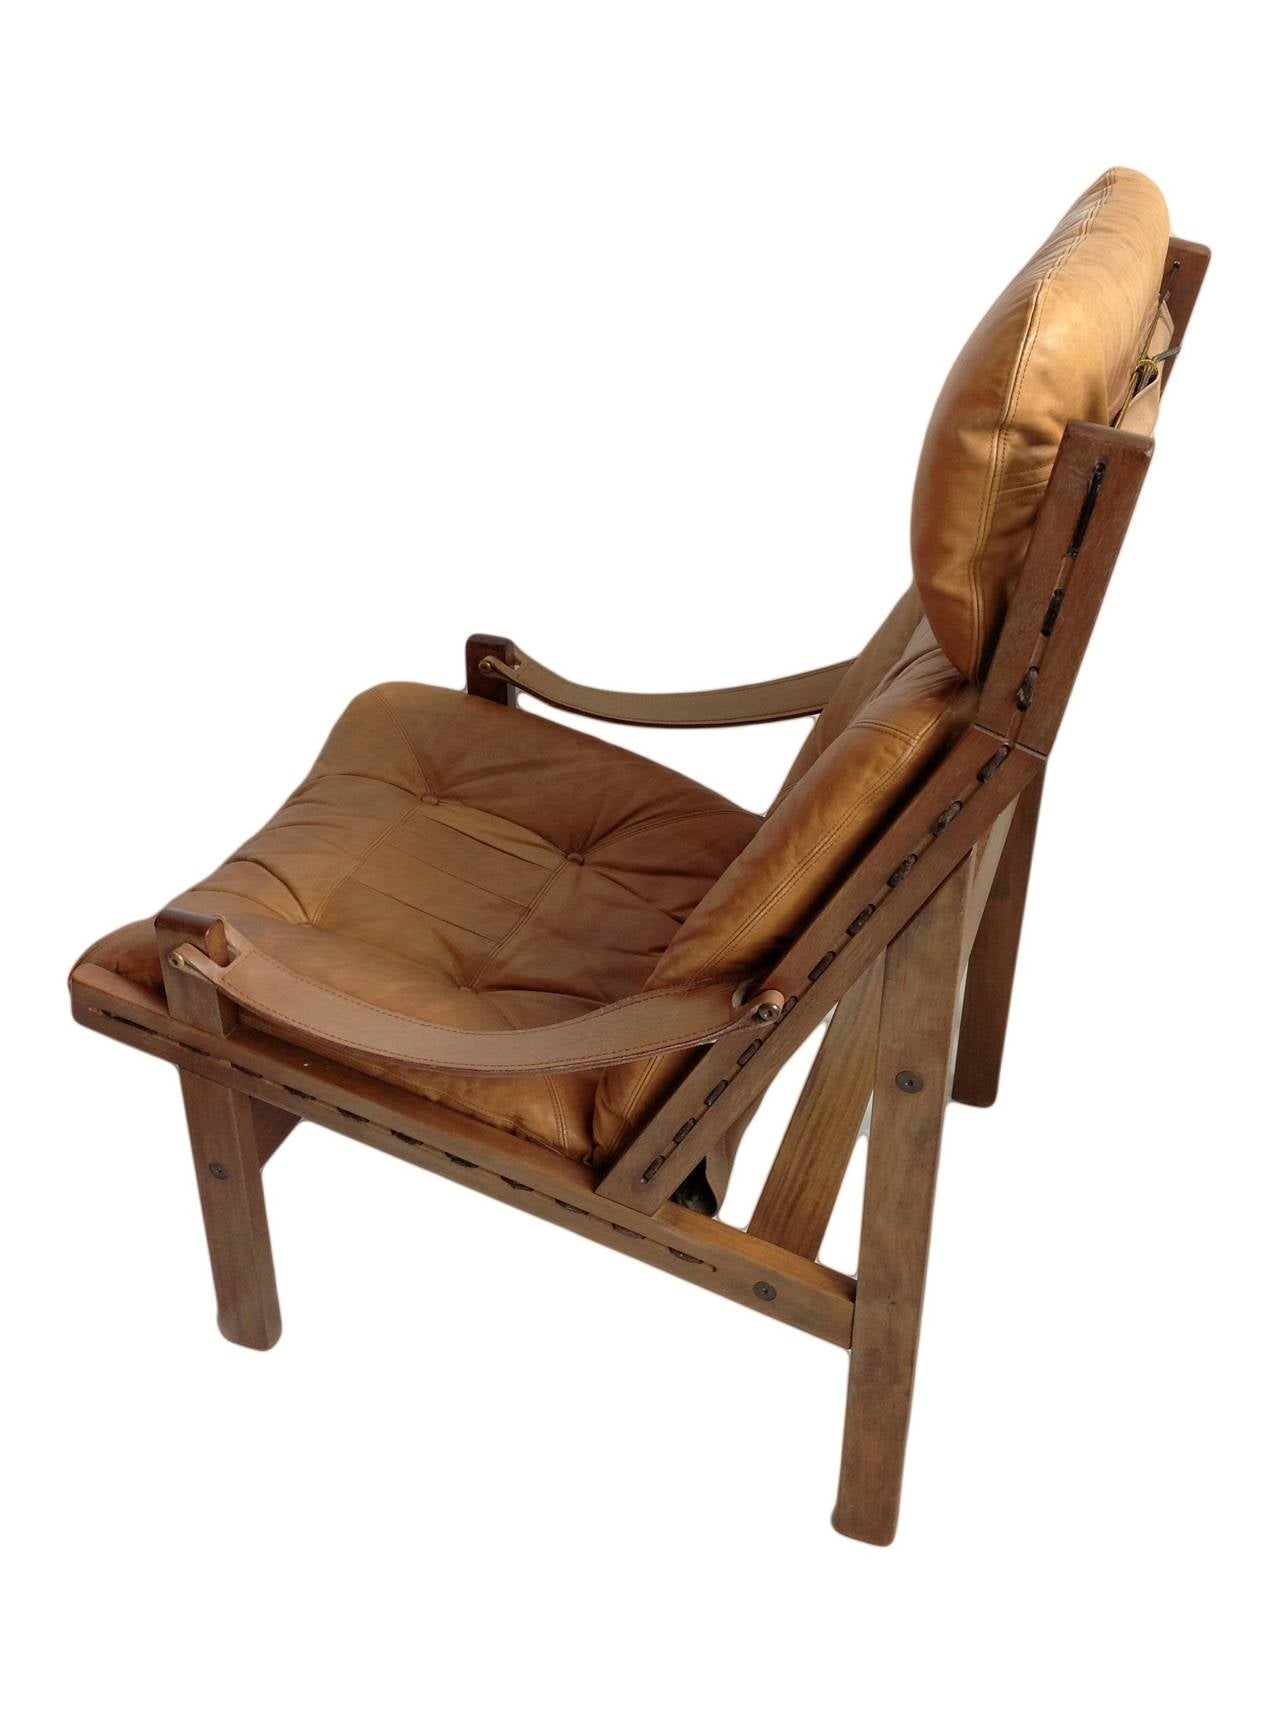 Leather Torbjorn Afdal. Hunter Chairs